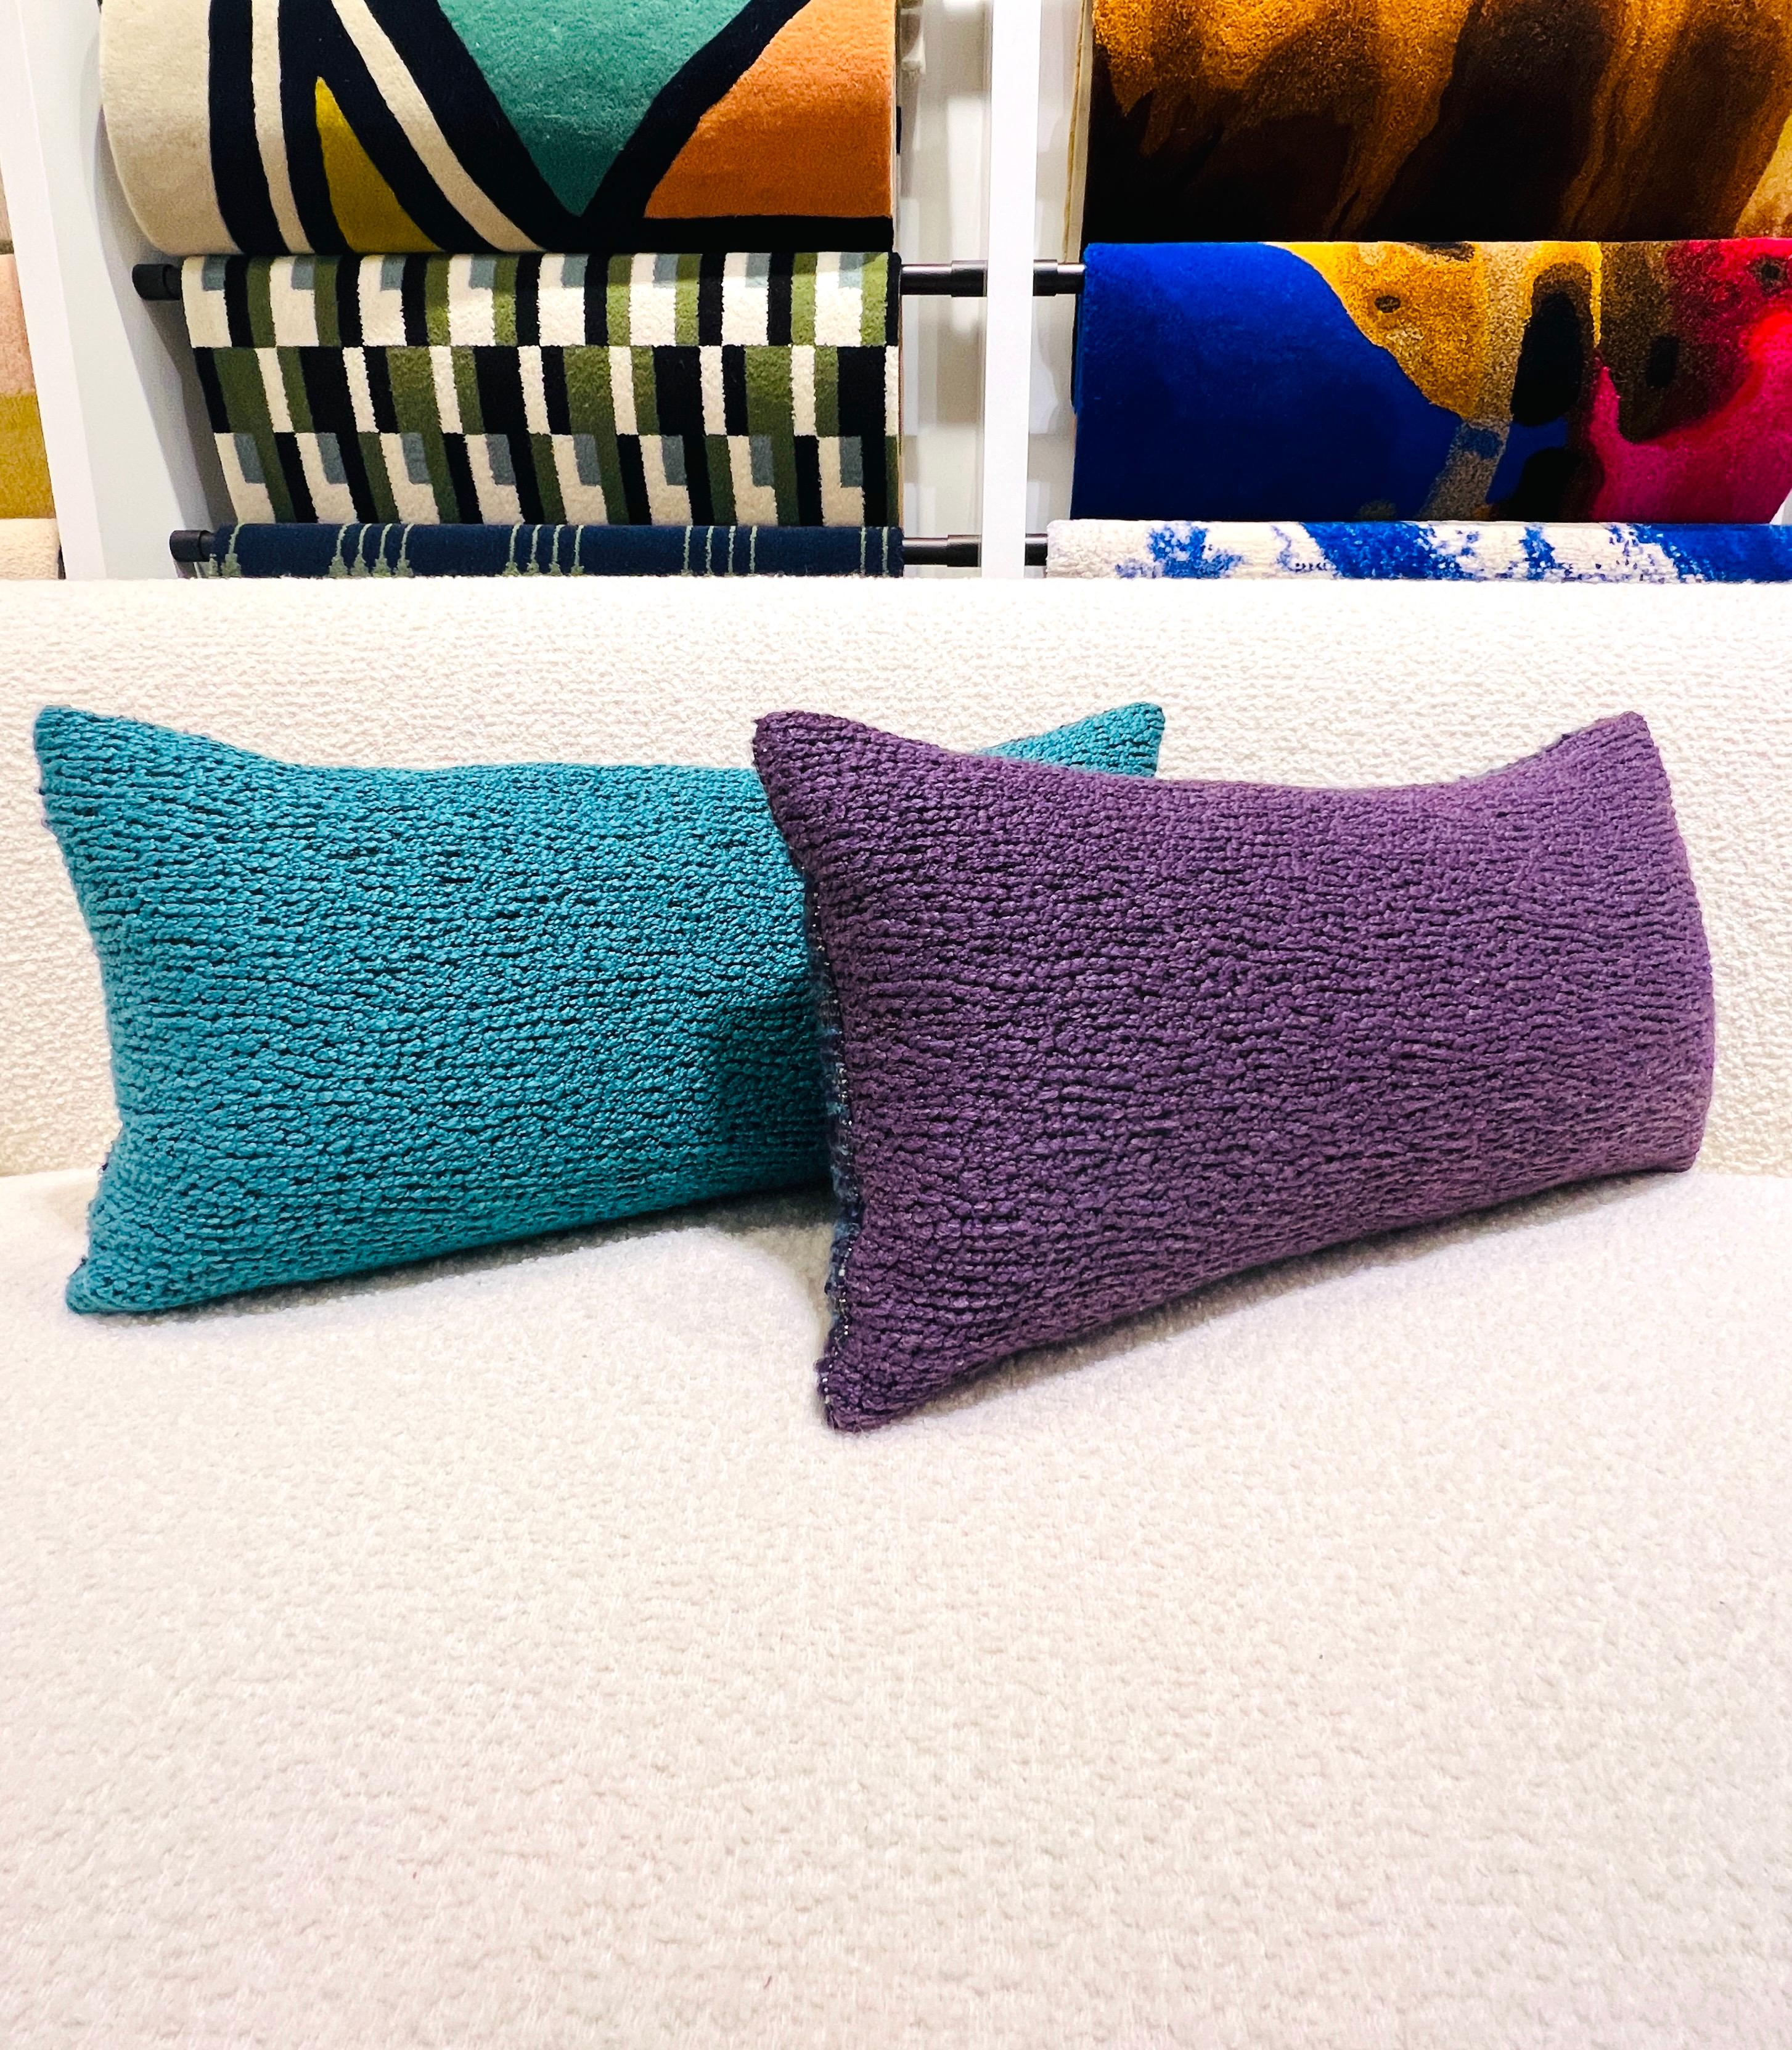 Pair of custom made throw pillows upholstered in Pierre Frey's Esteban fabric featuring textured wool-like threads which plays with the rustic codes of traditional Latin American weaves. One pillow in violet-purple, the other in turquoise-aqua, and